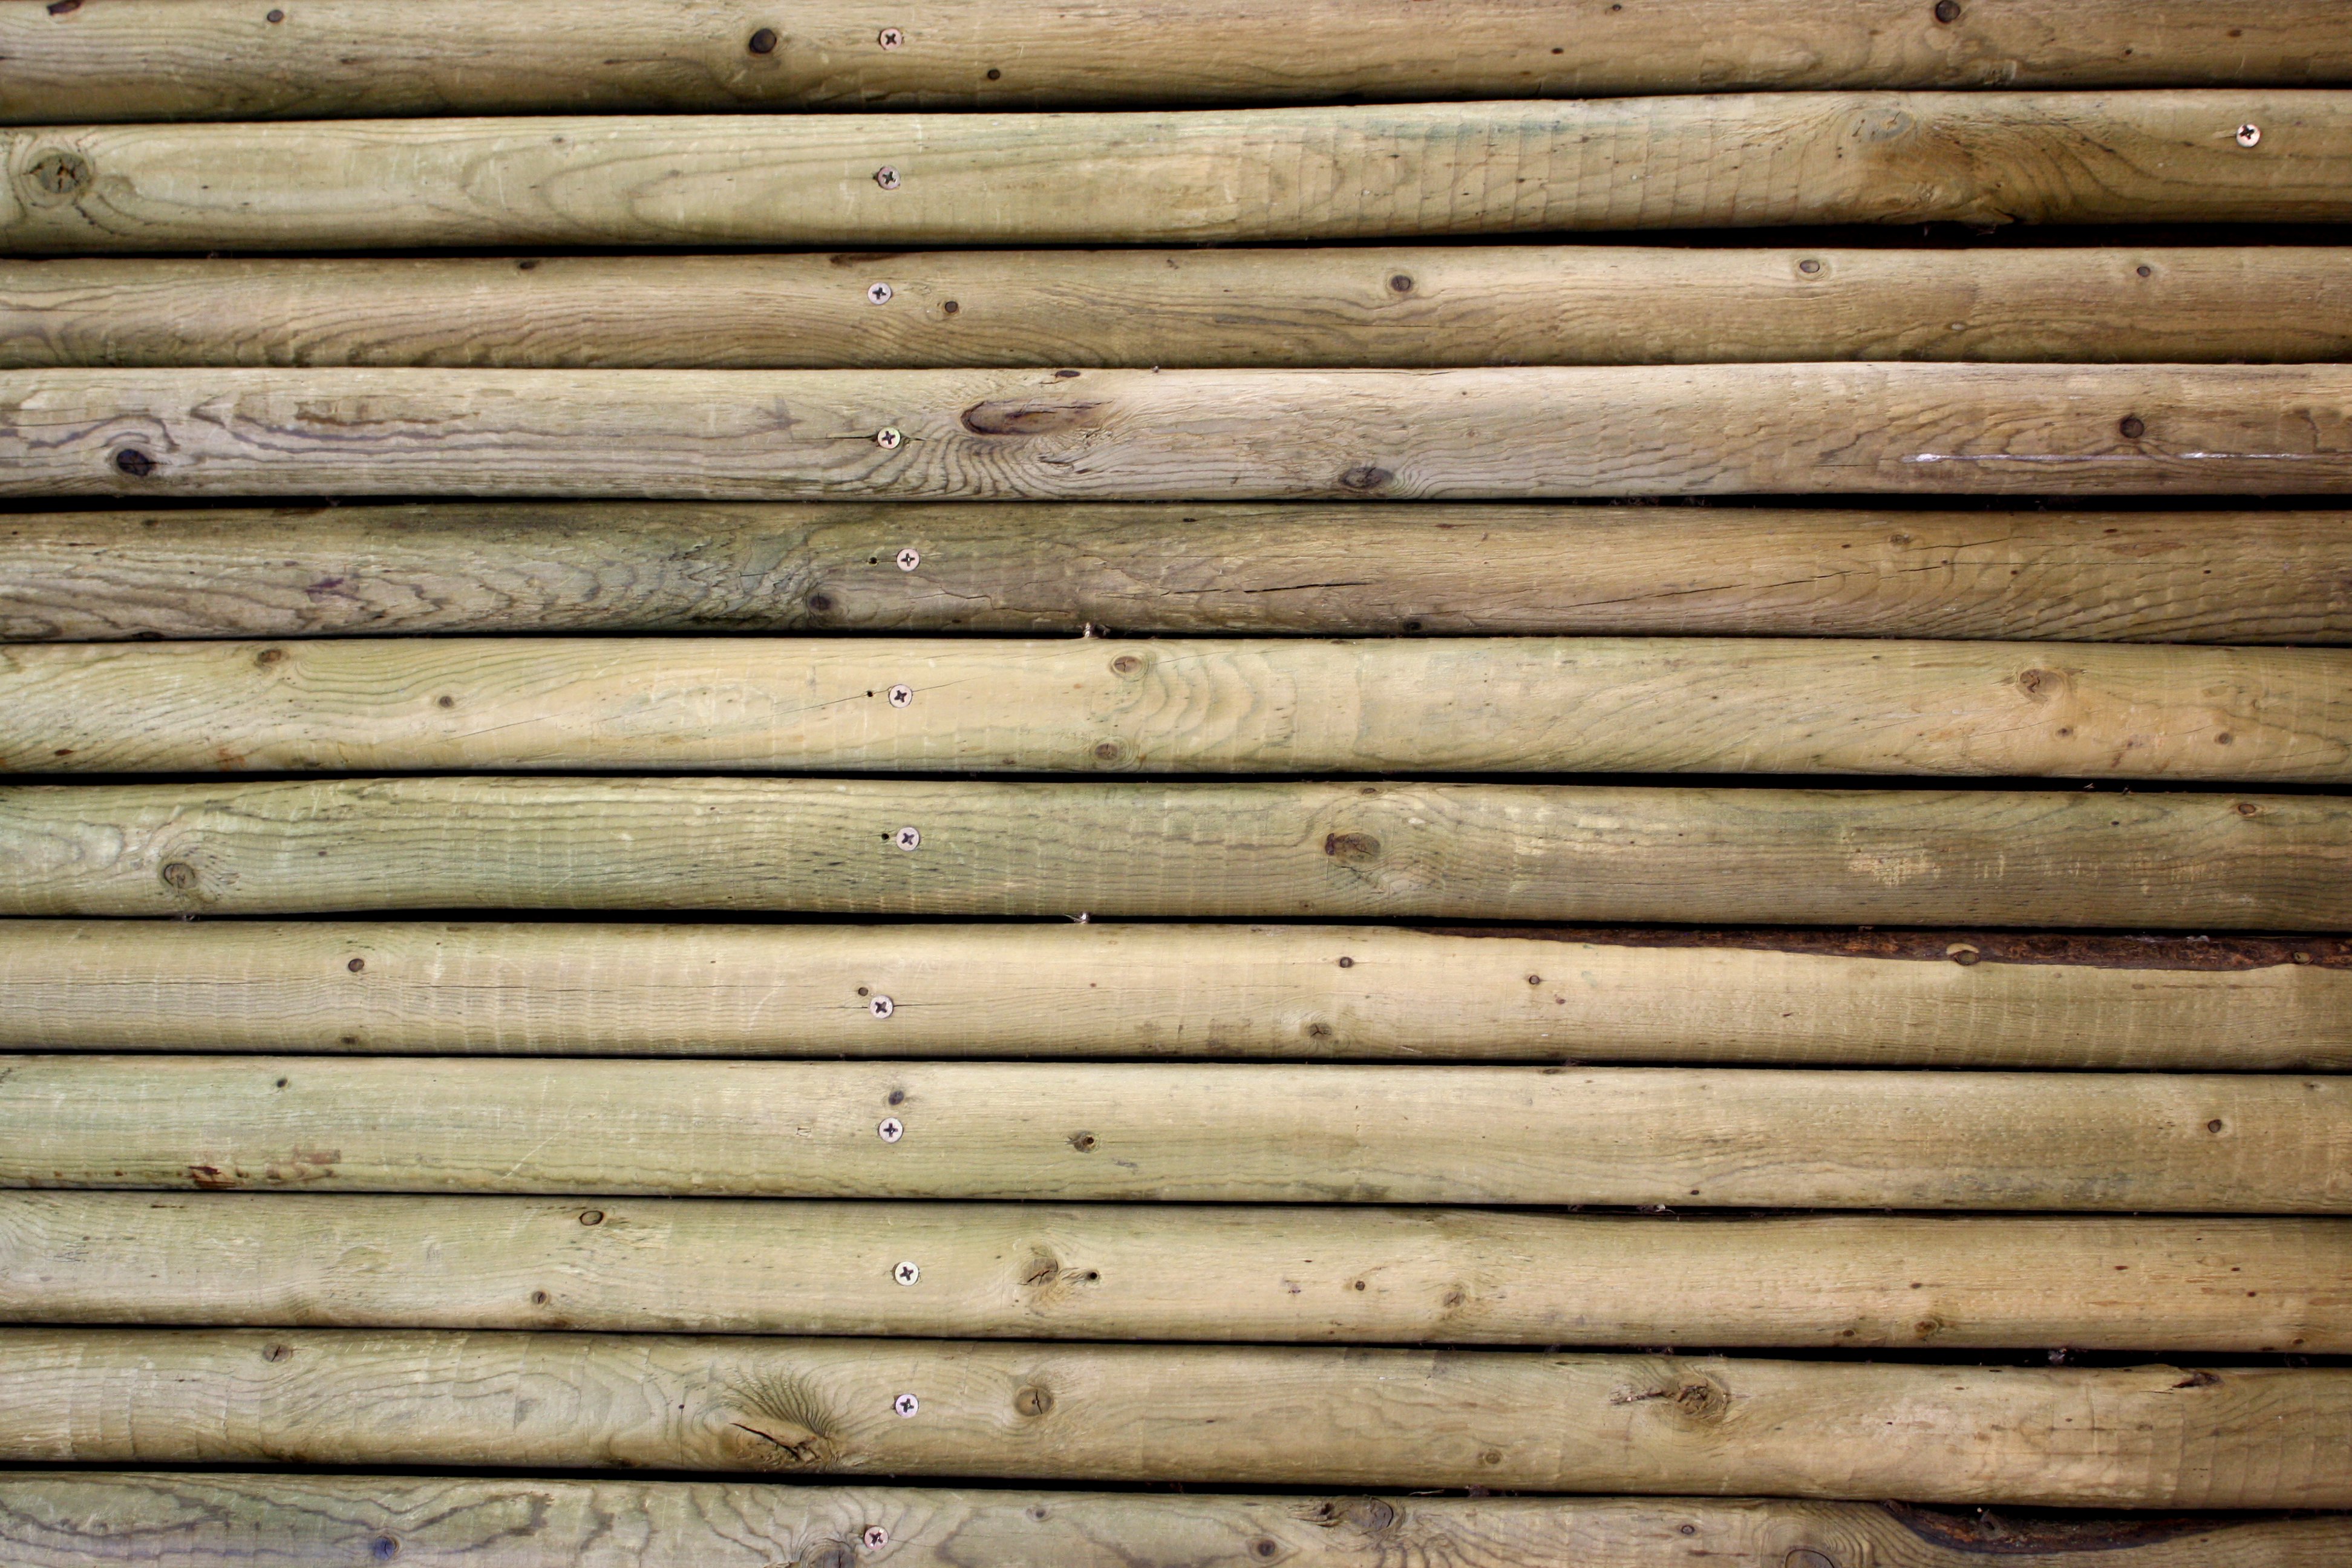 Wooden Poles Texture   Free High Resolution Photo   Dimensions  3888    